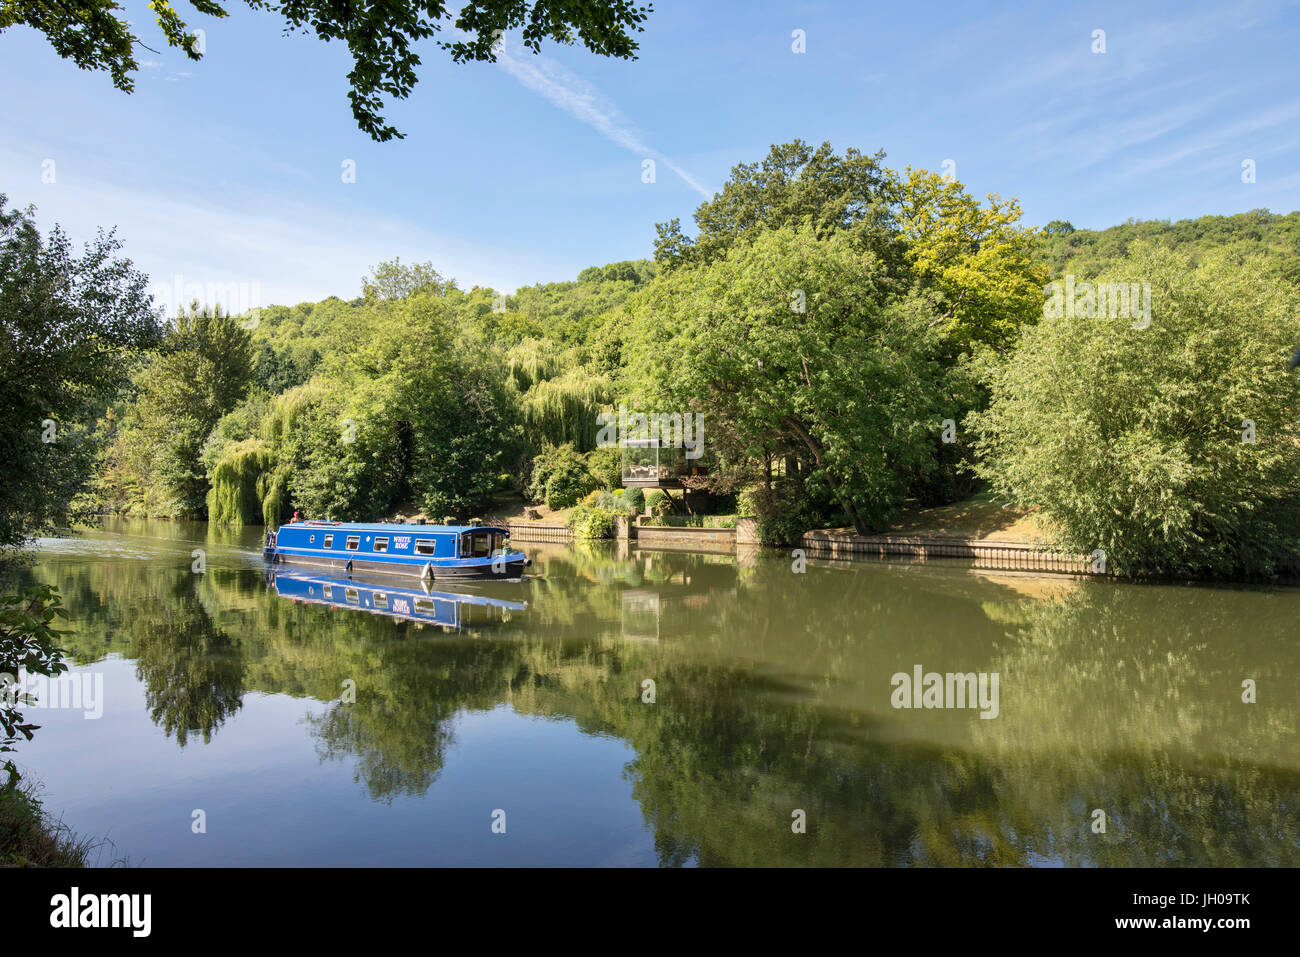 Narrowboat on the river thames at Streatley / Goring on Thames, South Oxfordshire, England Stock Photo